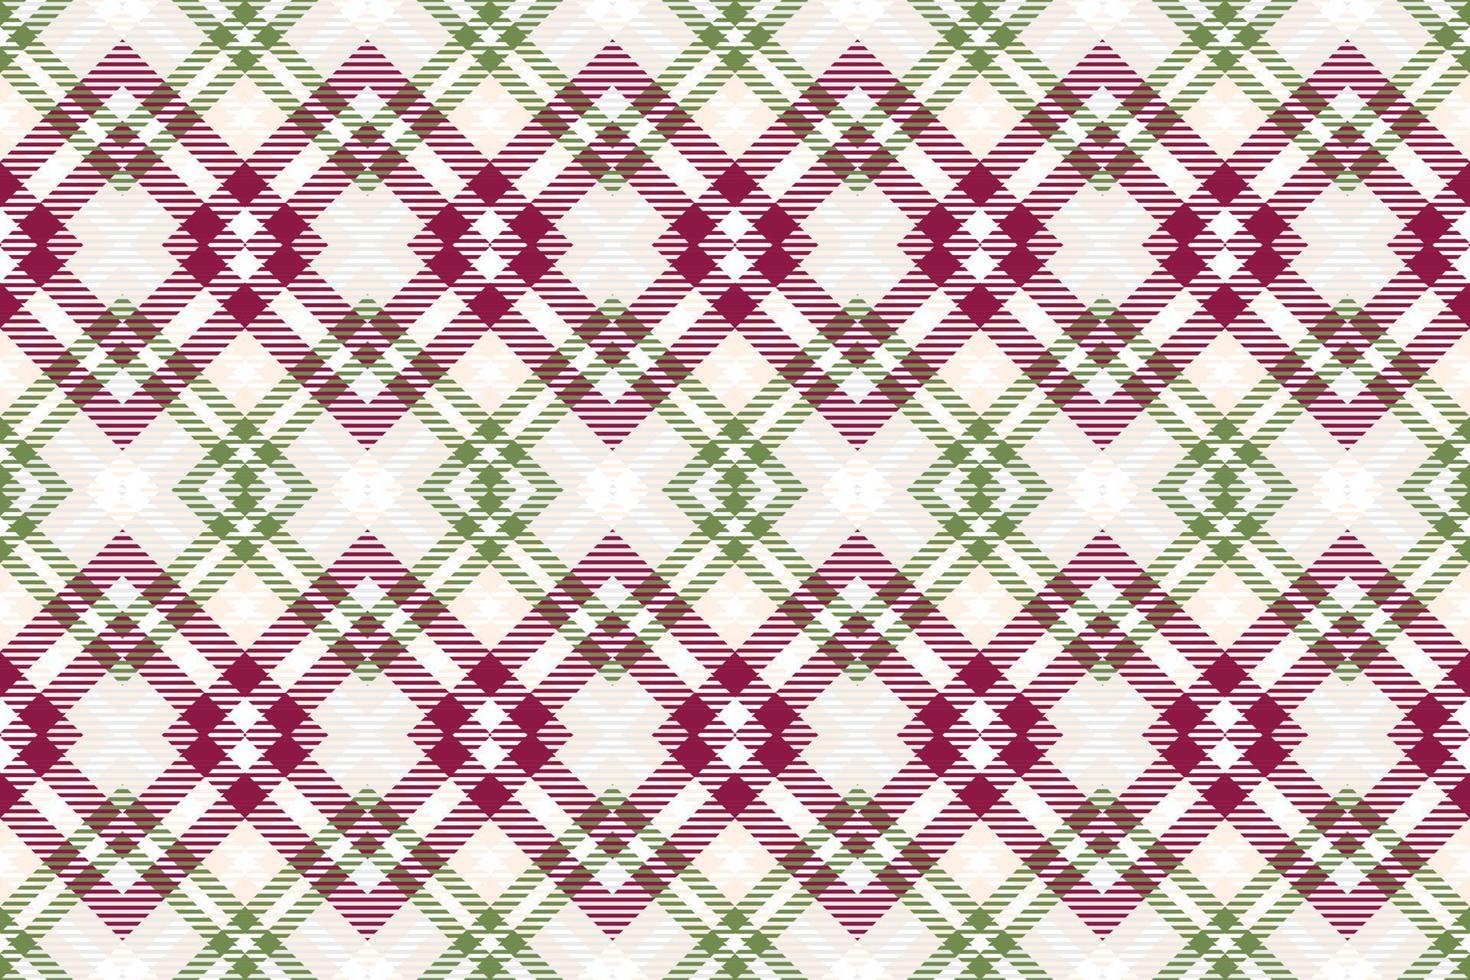 Check plaid pattern is a patterned cloth consisting of criss crossed, horizontal and vertical bands in multiple colours.plaid Seamless For scarf,pyjamas,blanket,duvet,kilt large shawl. vector